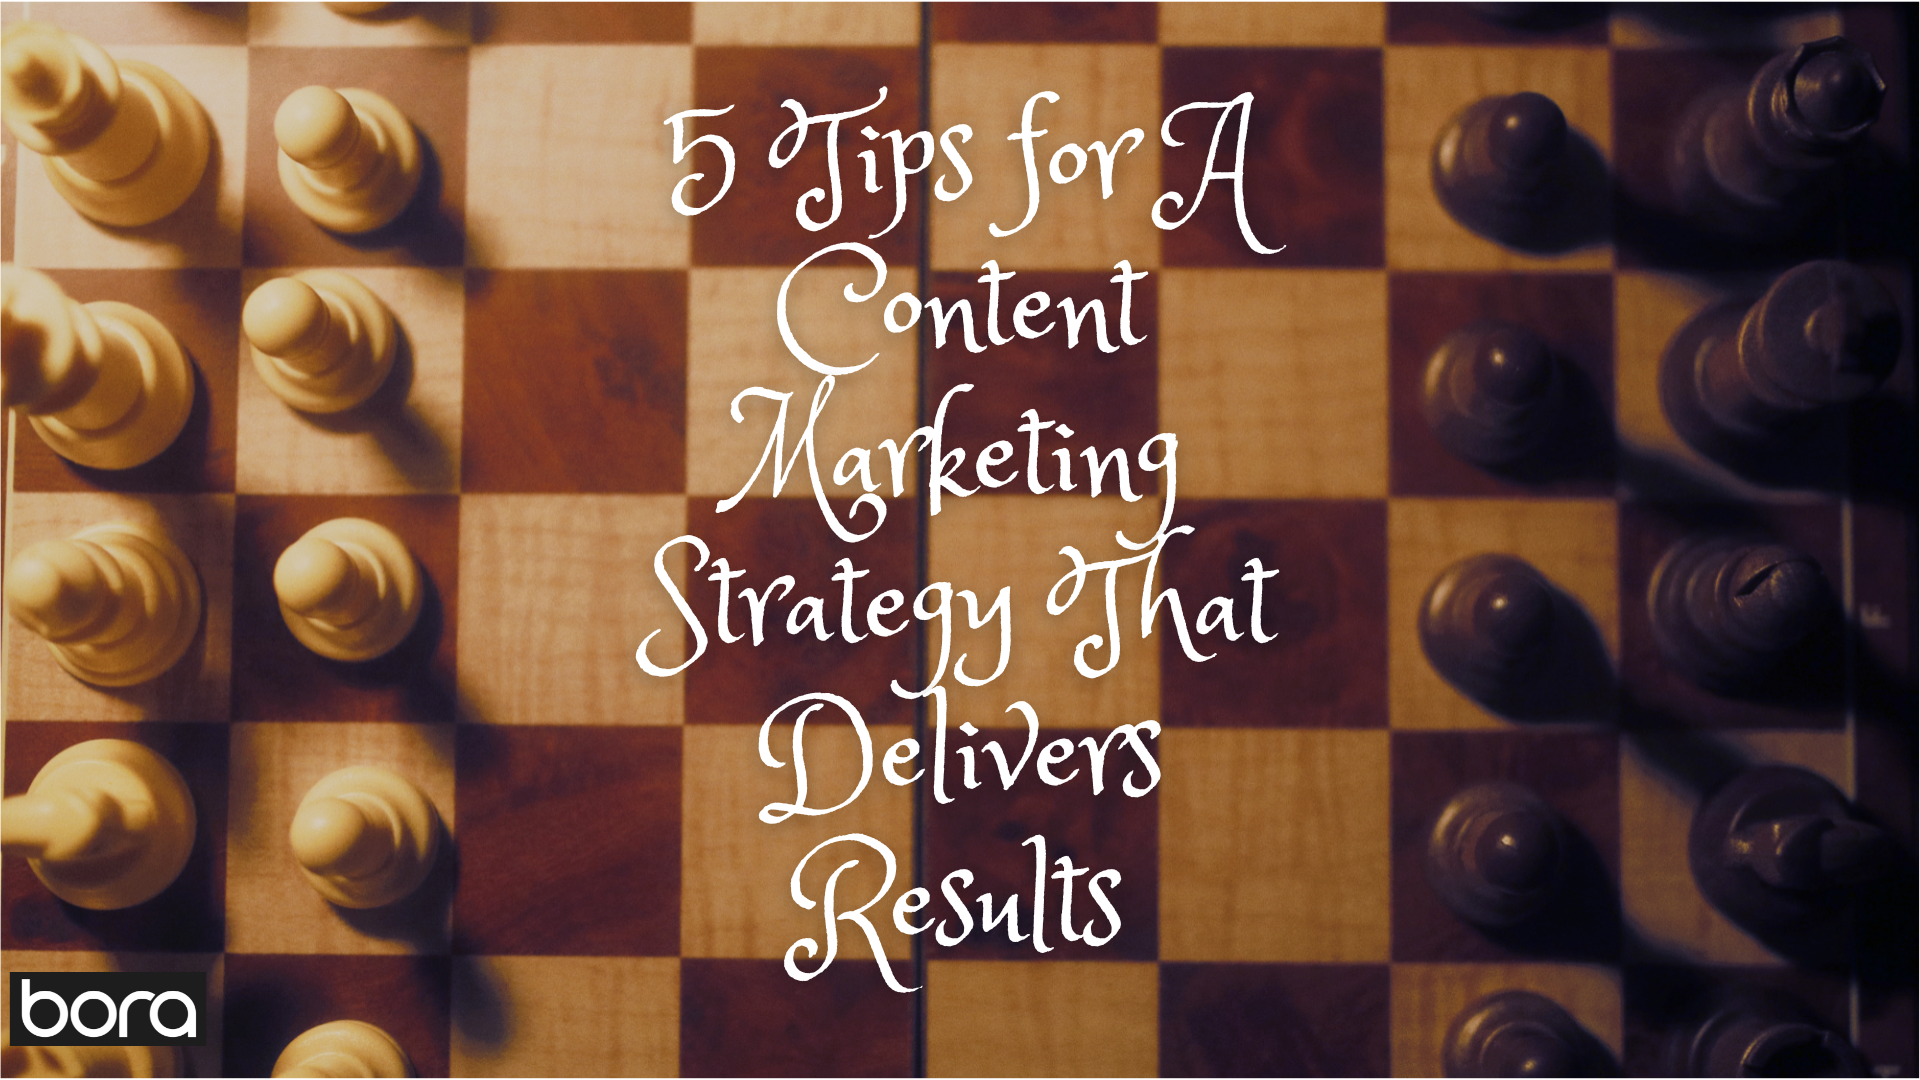 5 Tips for A Content Marketing Strategy That Delivers Results